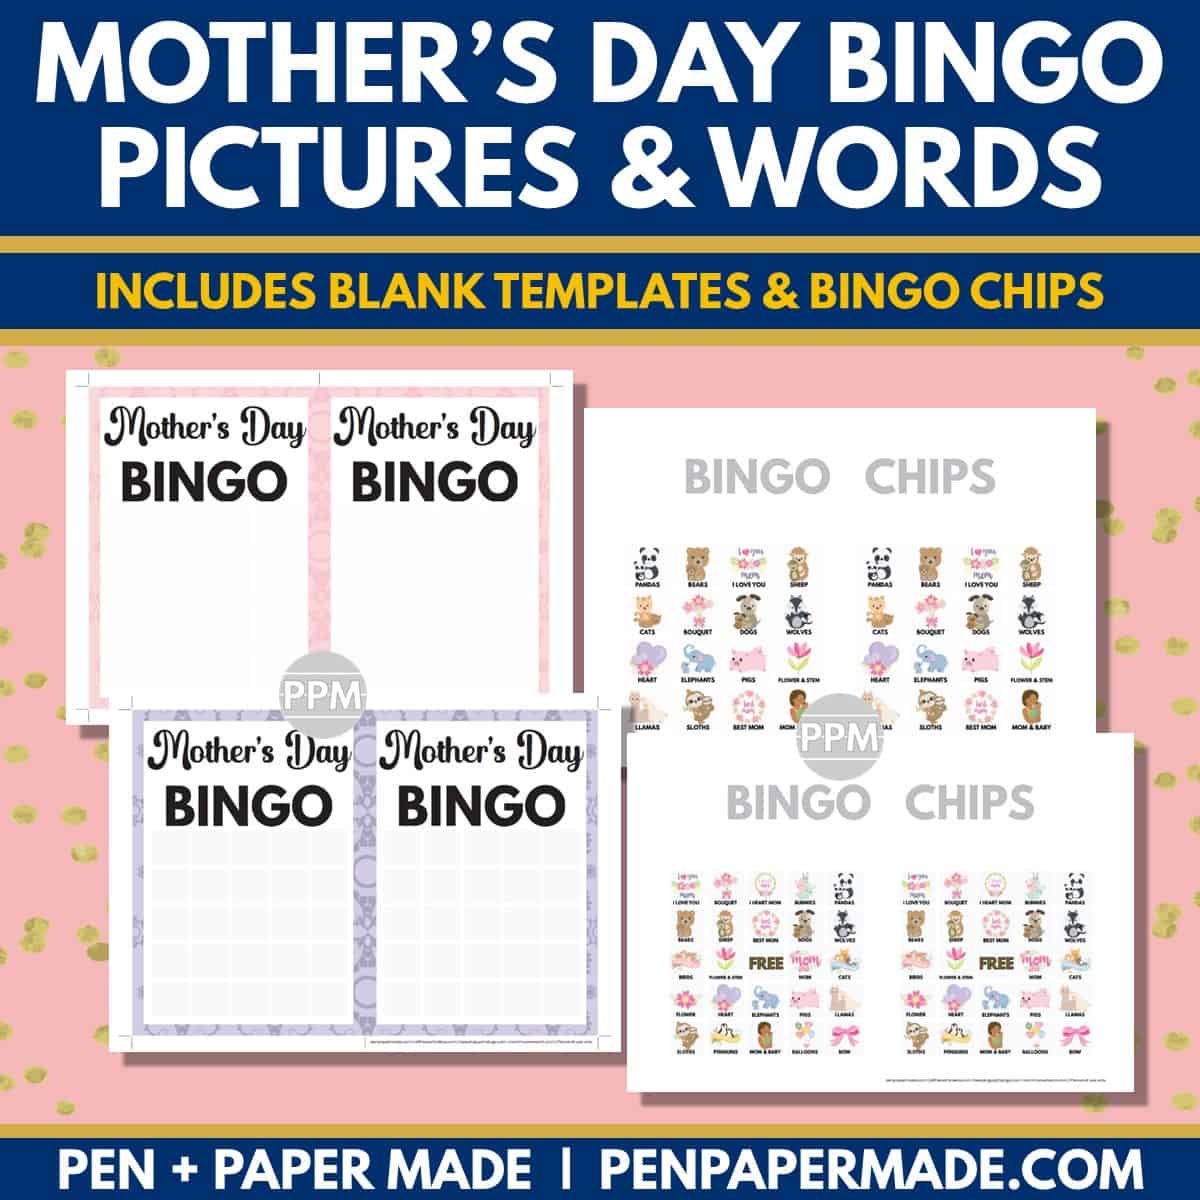 mother's day bingo card 5x5, 4x4 game chips, tokens, markers.